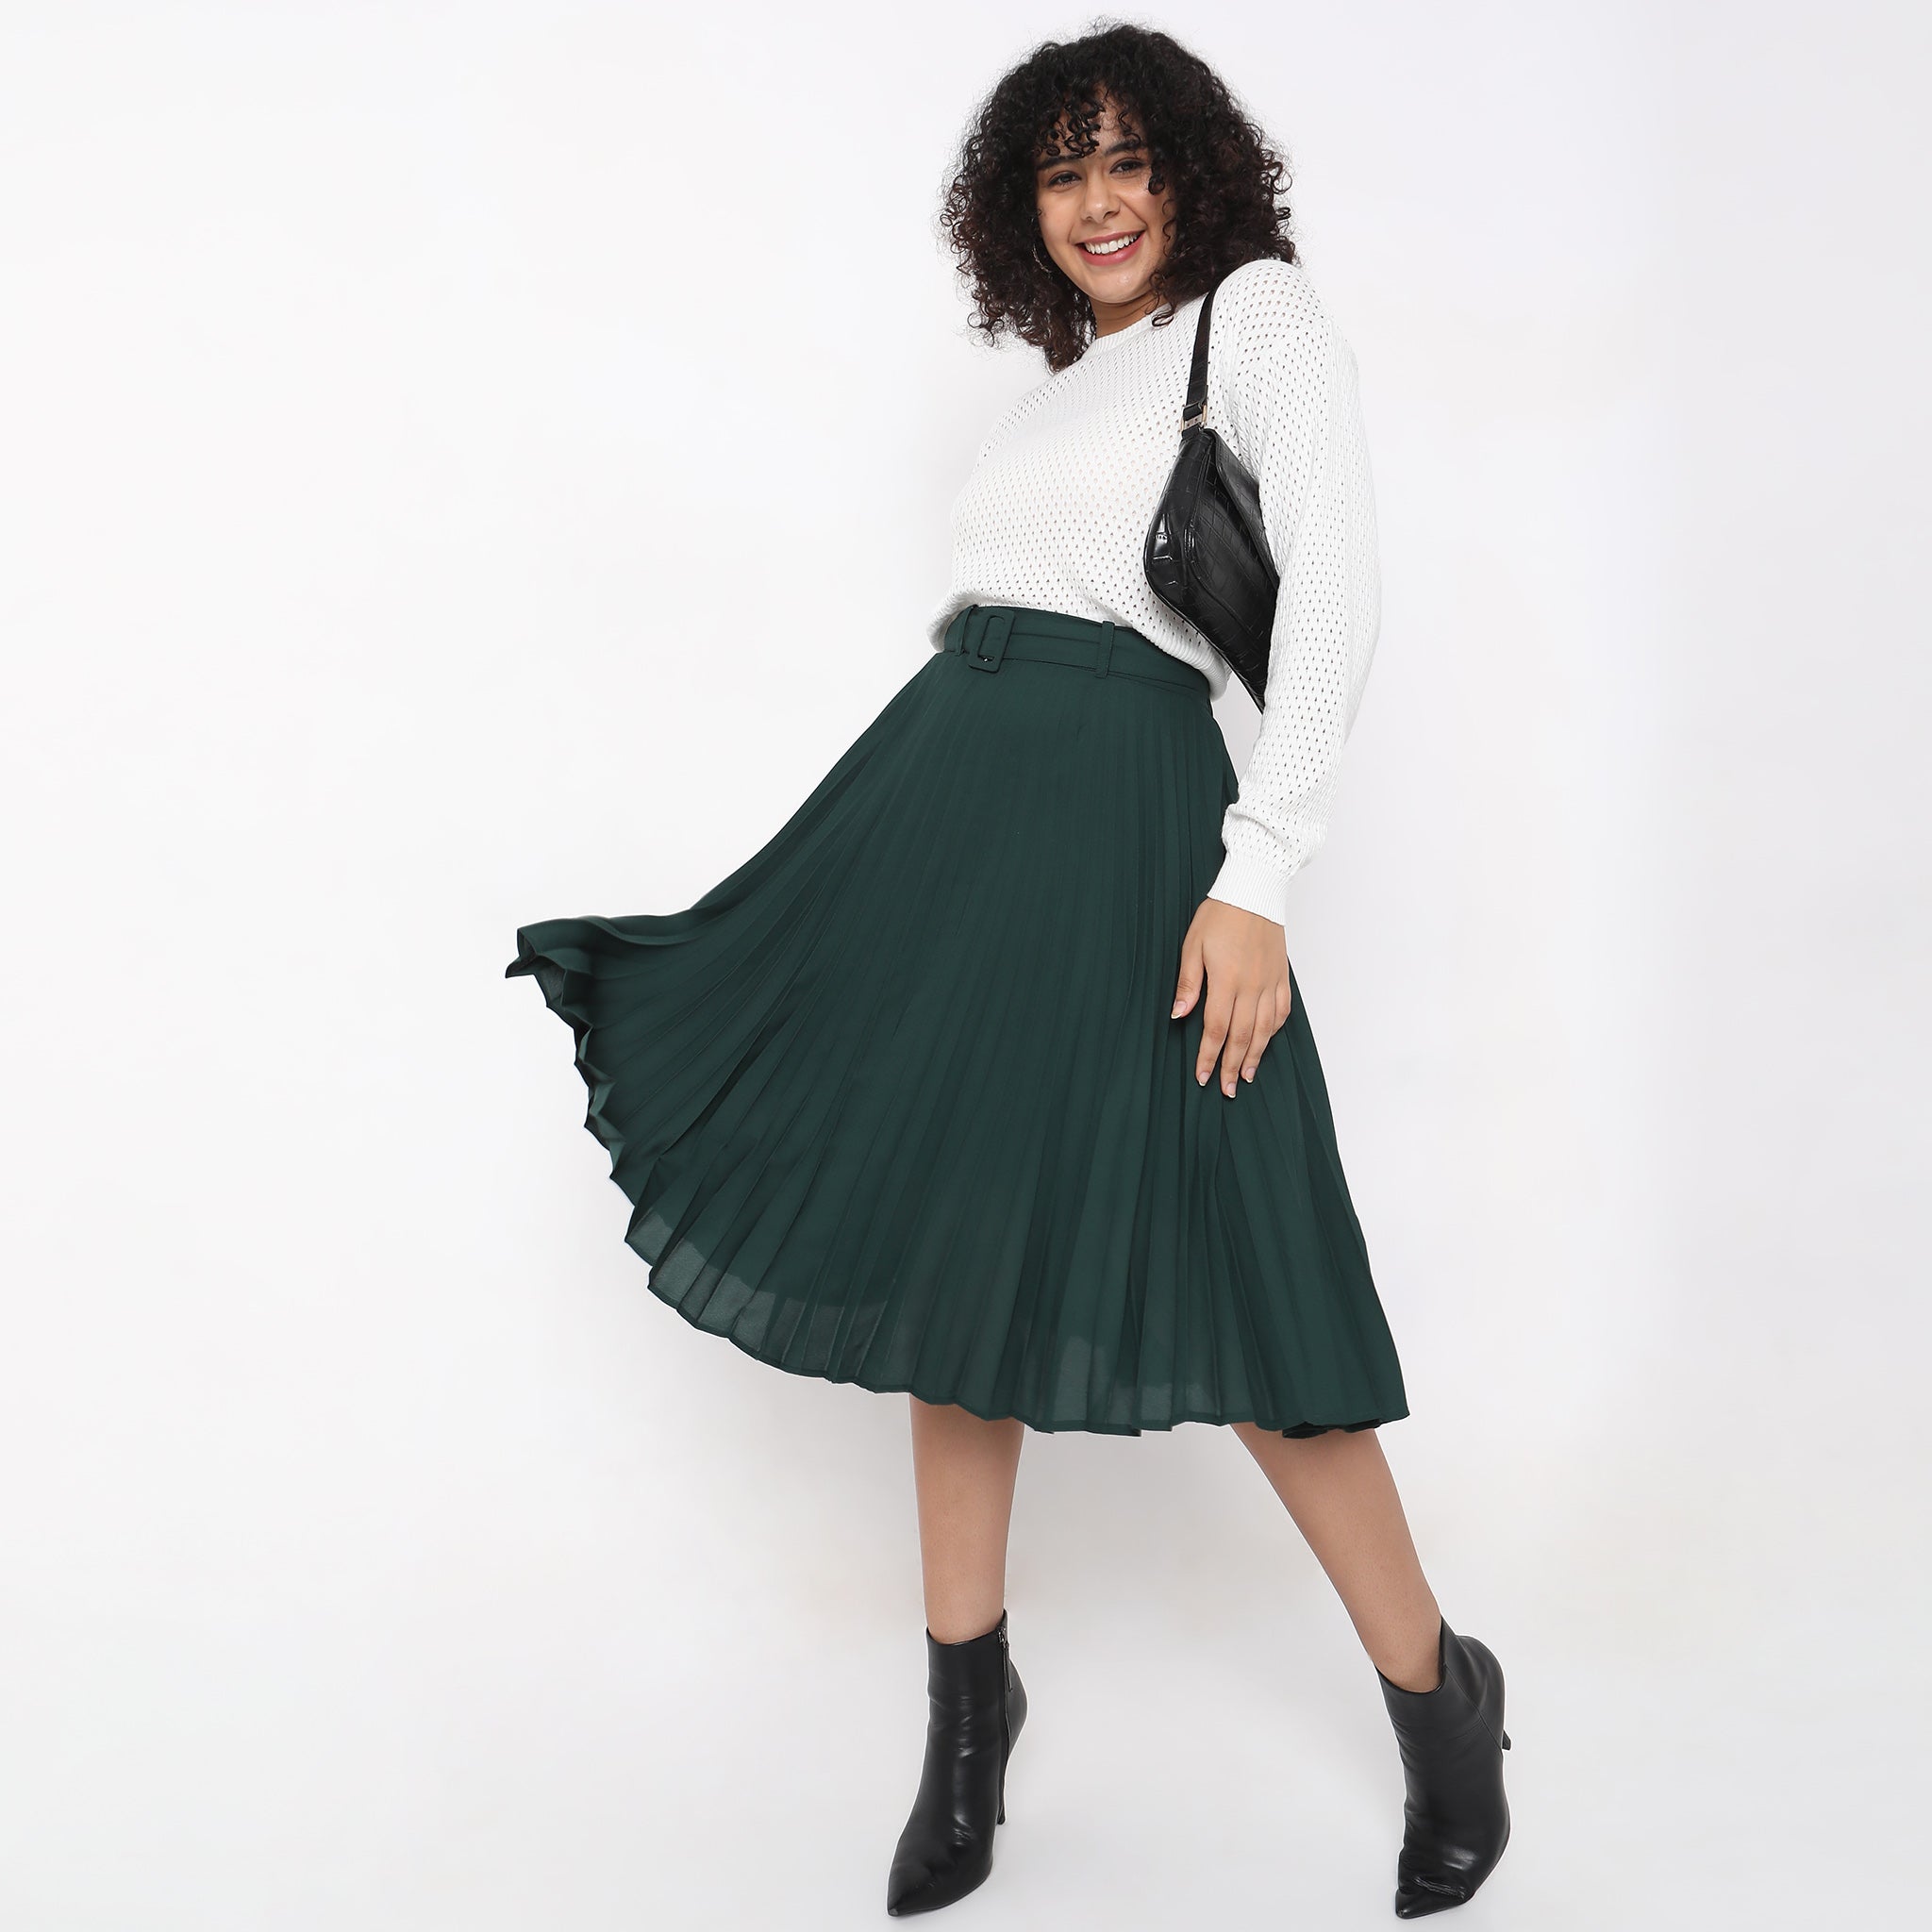 Regular Fit Solid Mid Rise Skirts